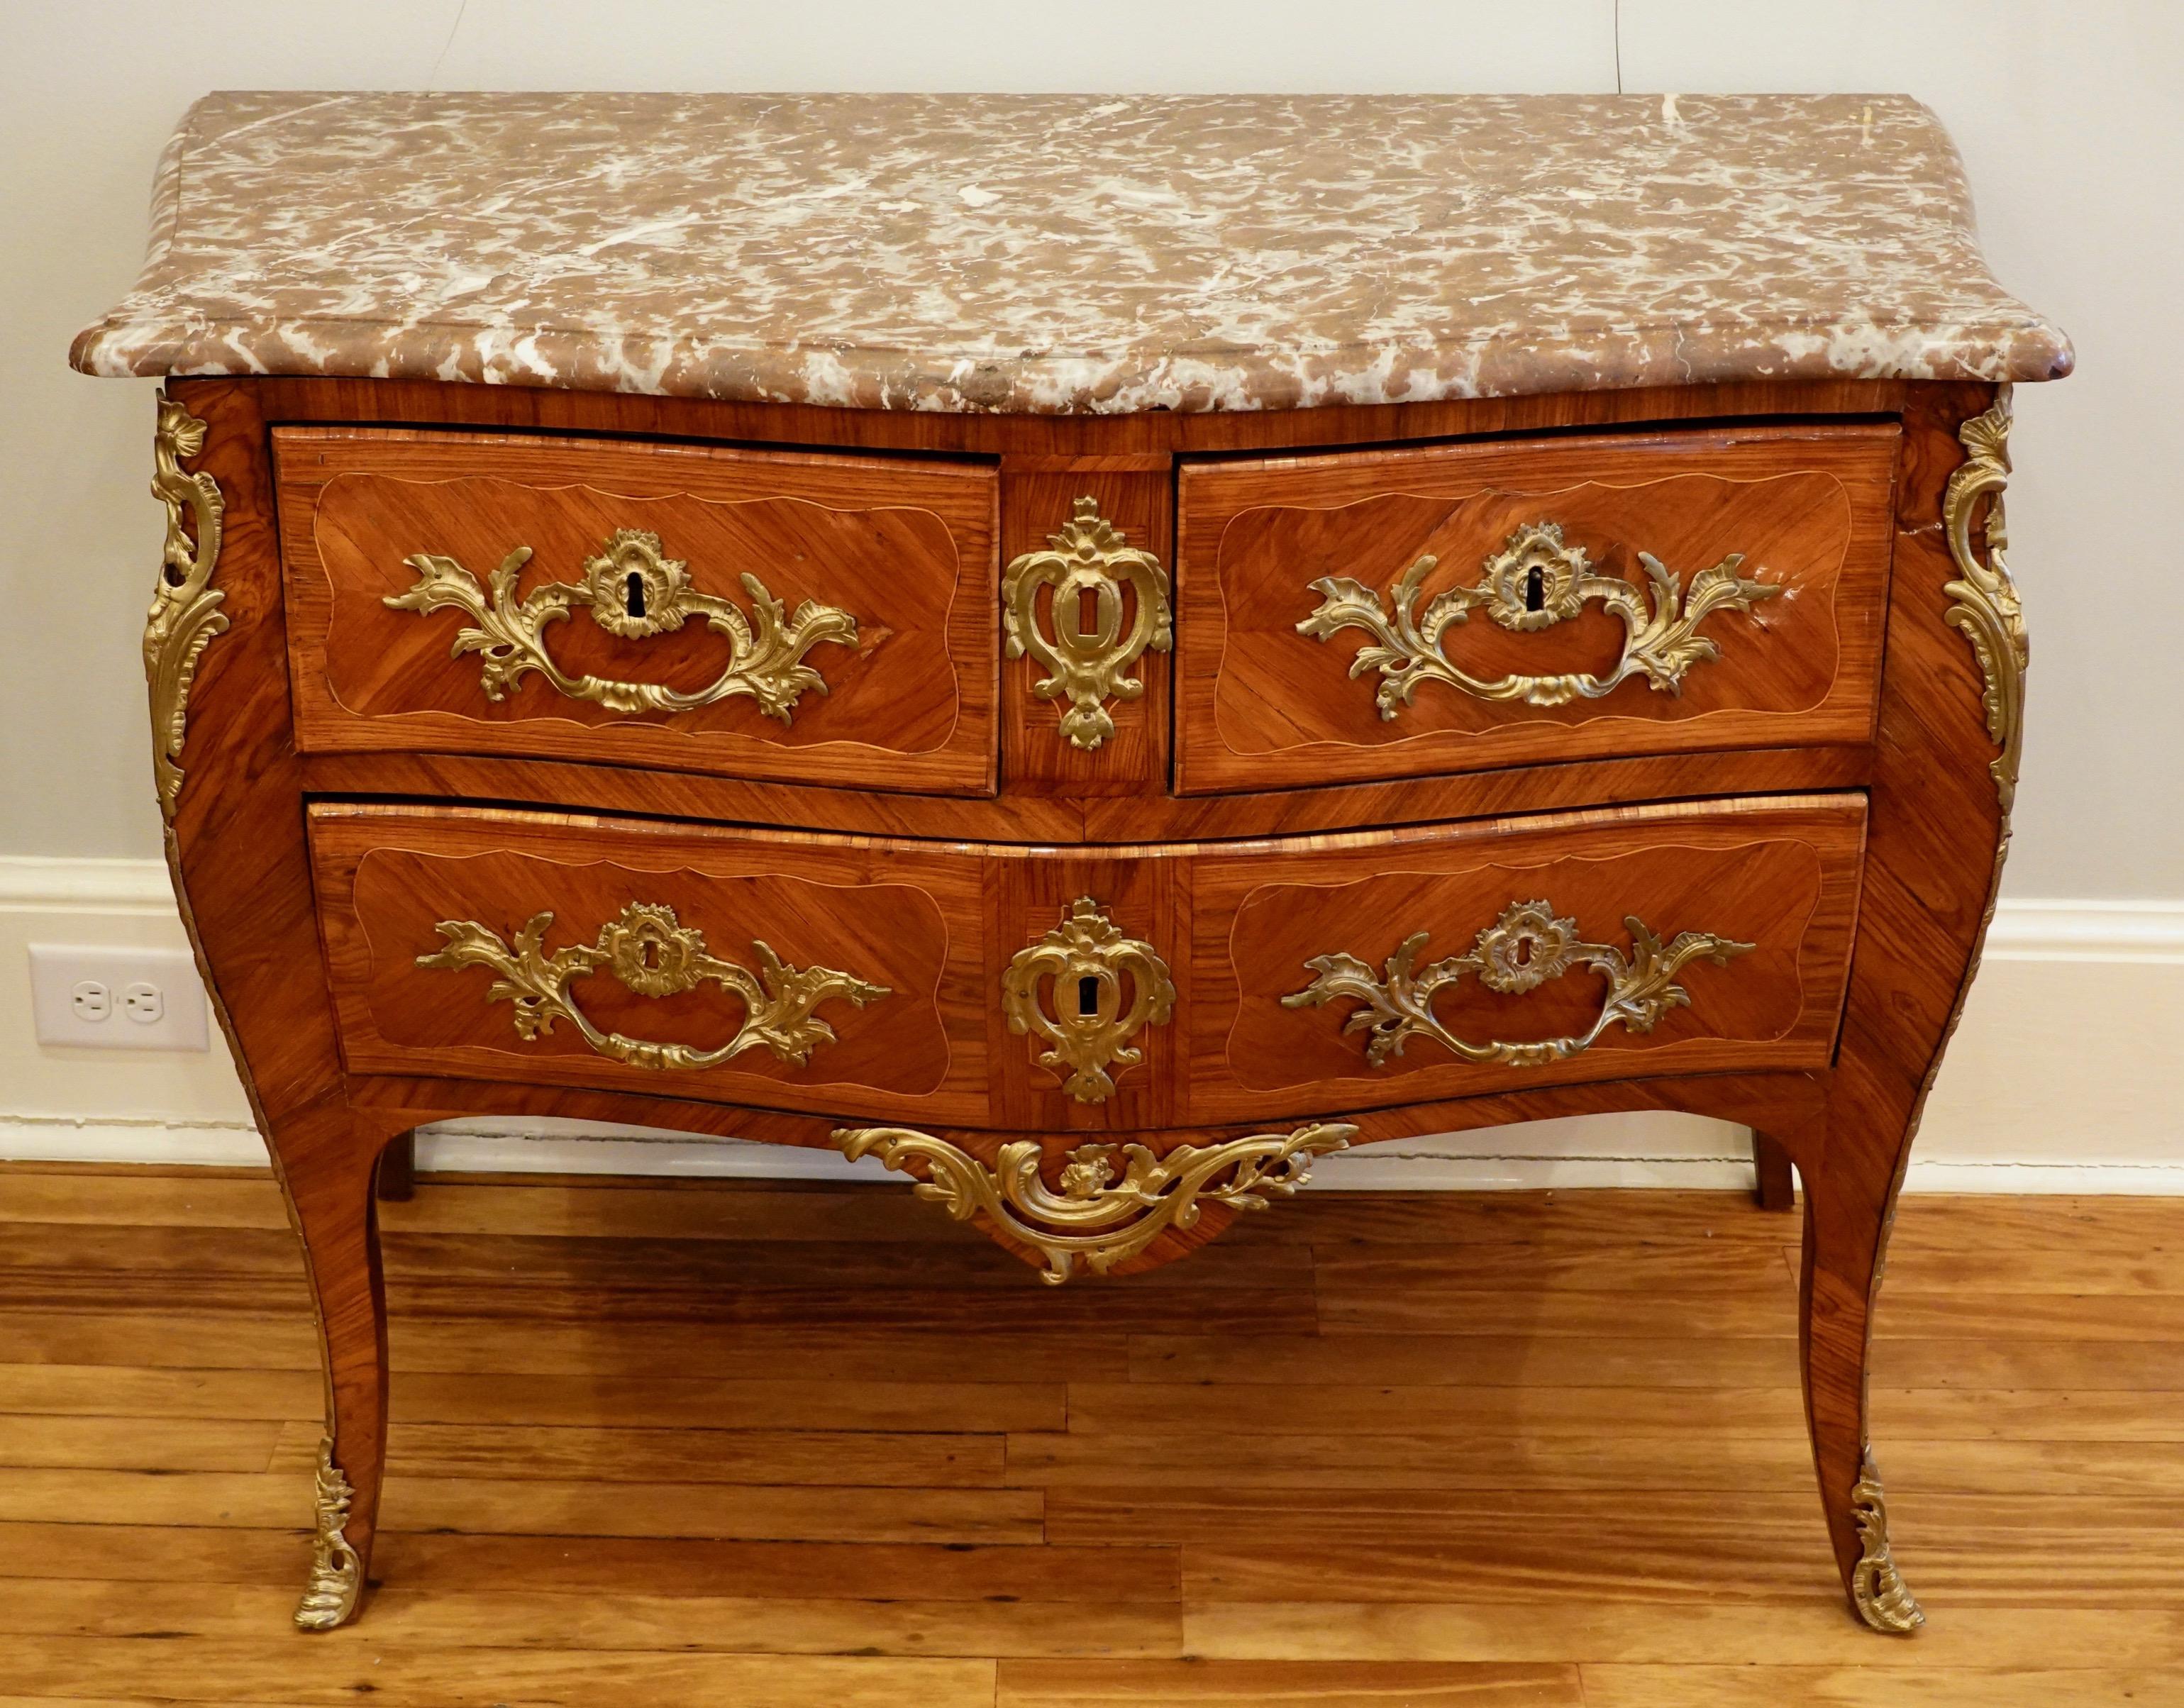 Very high quality French, Louis XV period commode (sauteuse) stamped by the Ebeniste, 